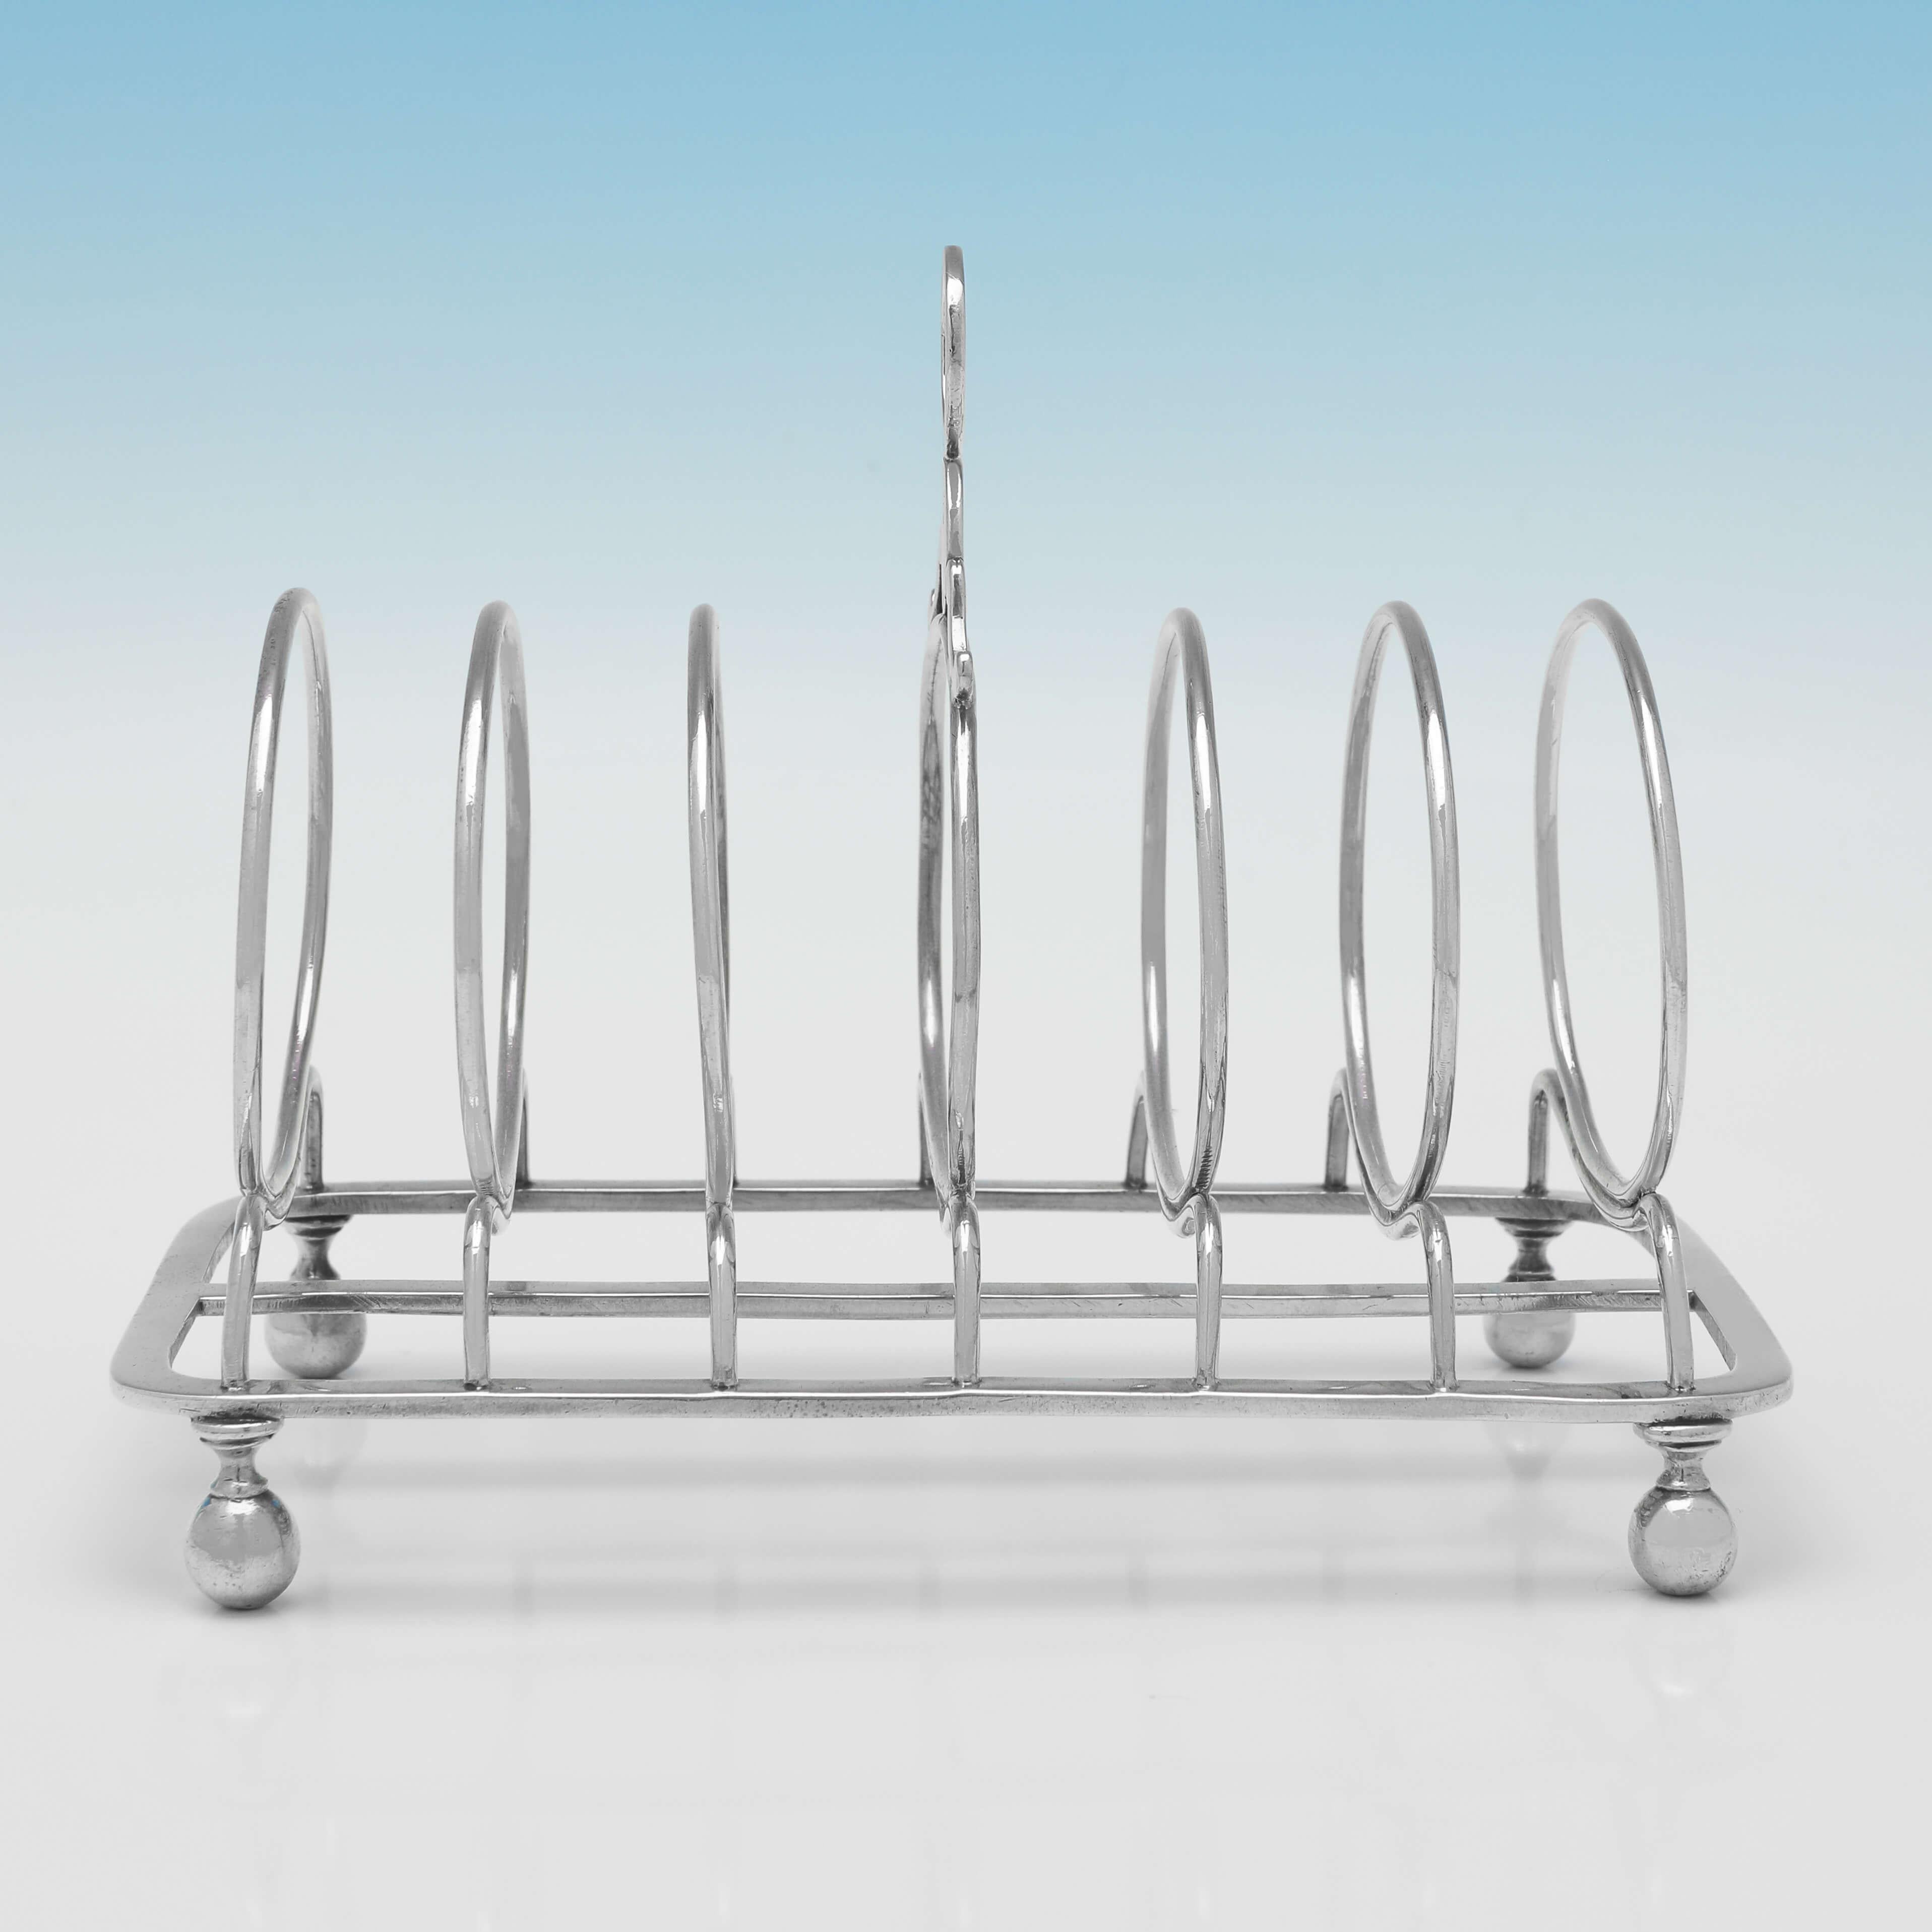 Hallmarked in London in 1805 by John Emes, this very handsome, George III, Antique Sterling Silver Toast Rack, is plain in style, standing on 4 ball feet, and holding 6 slices of toast. The toast rack measures 4.75